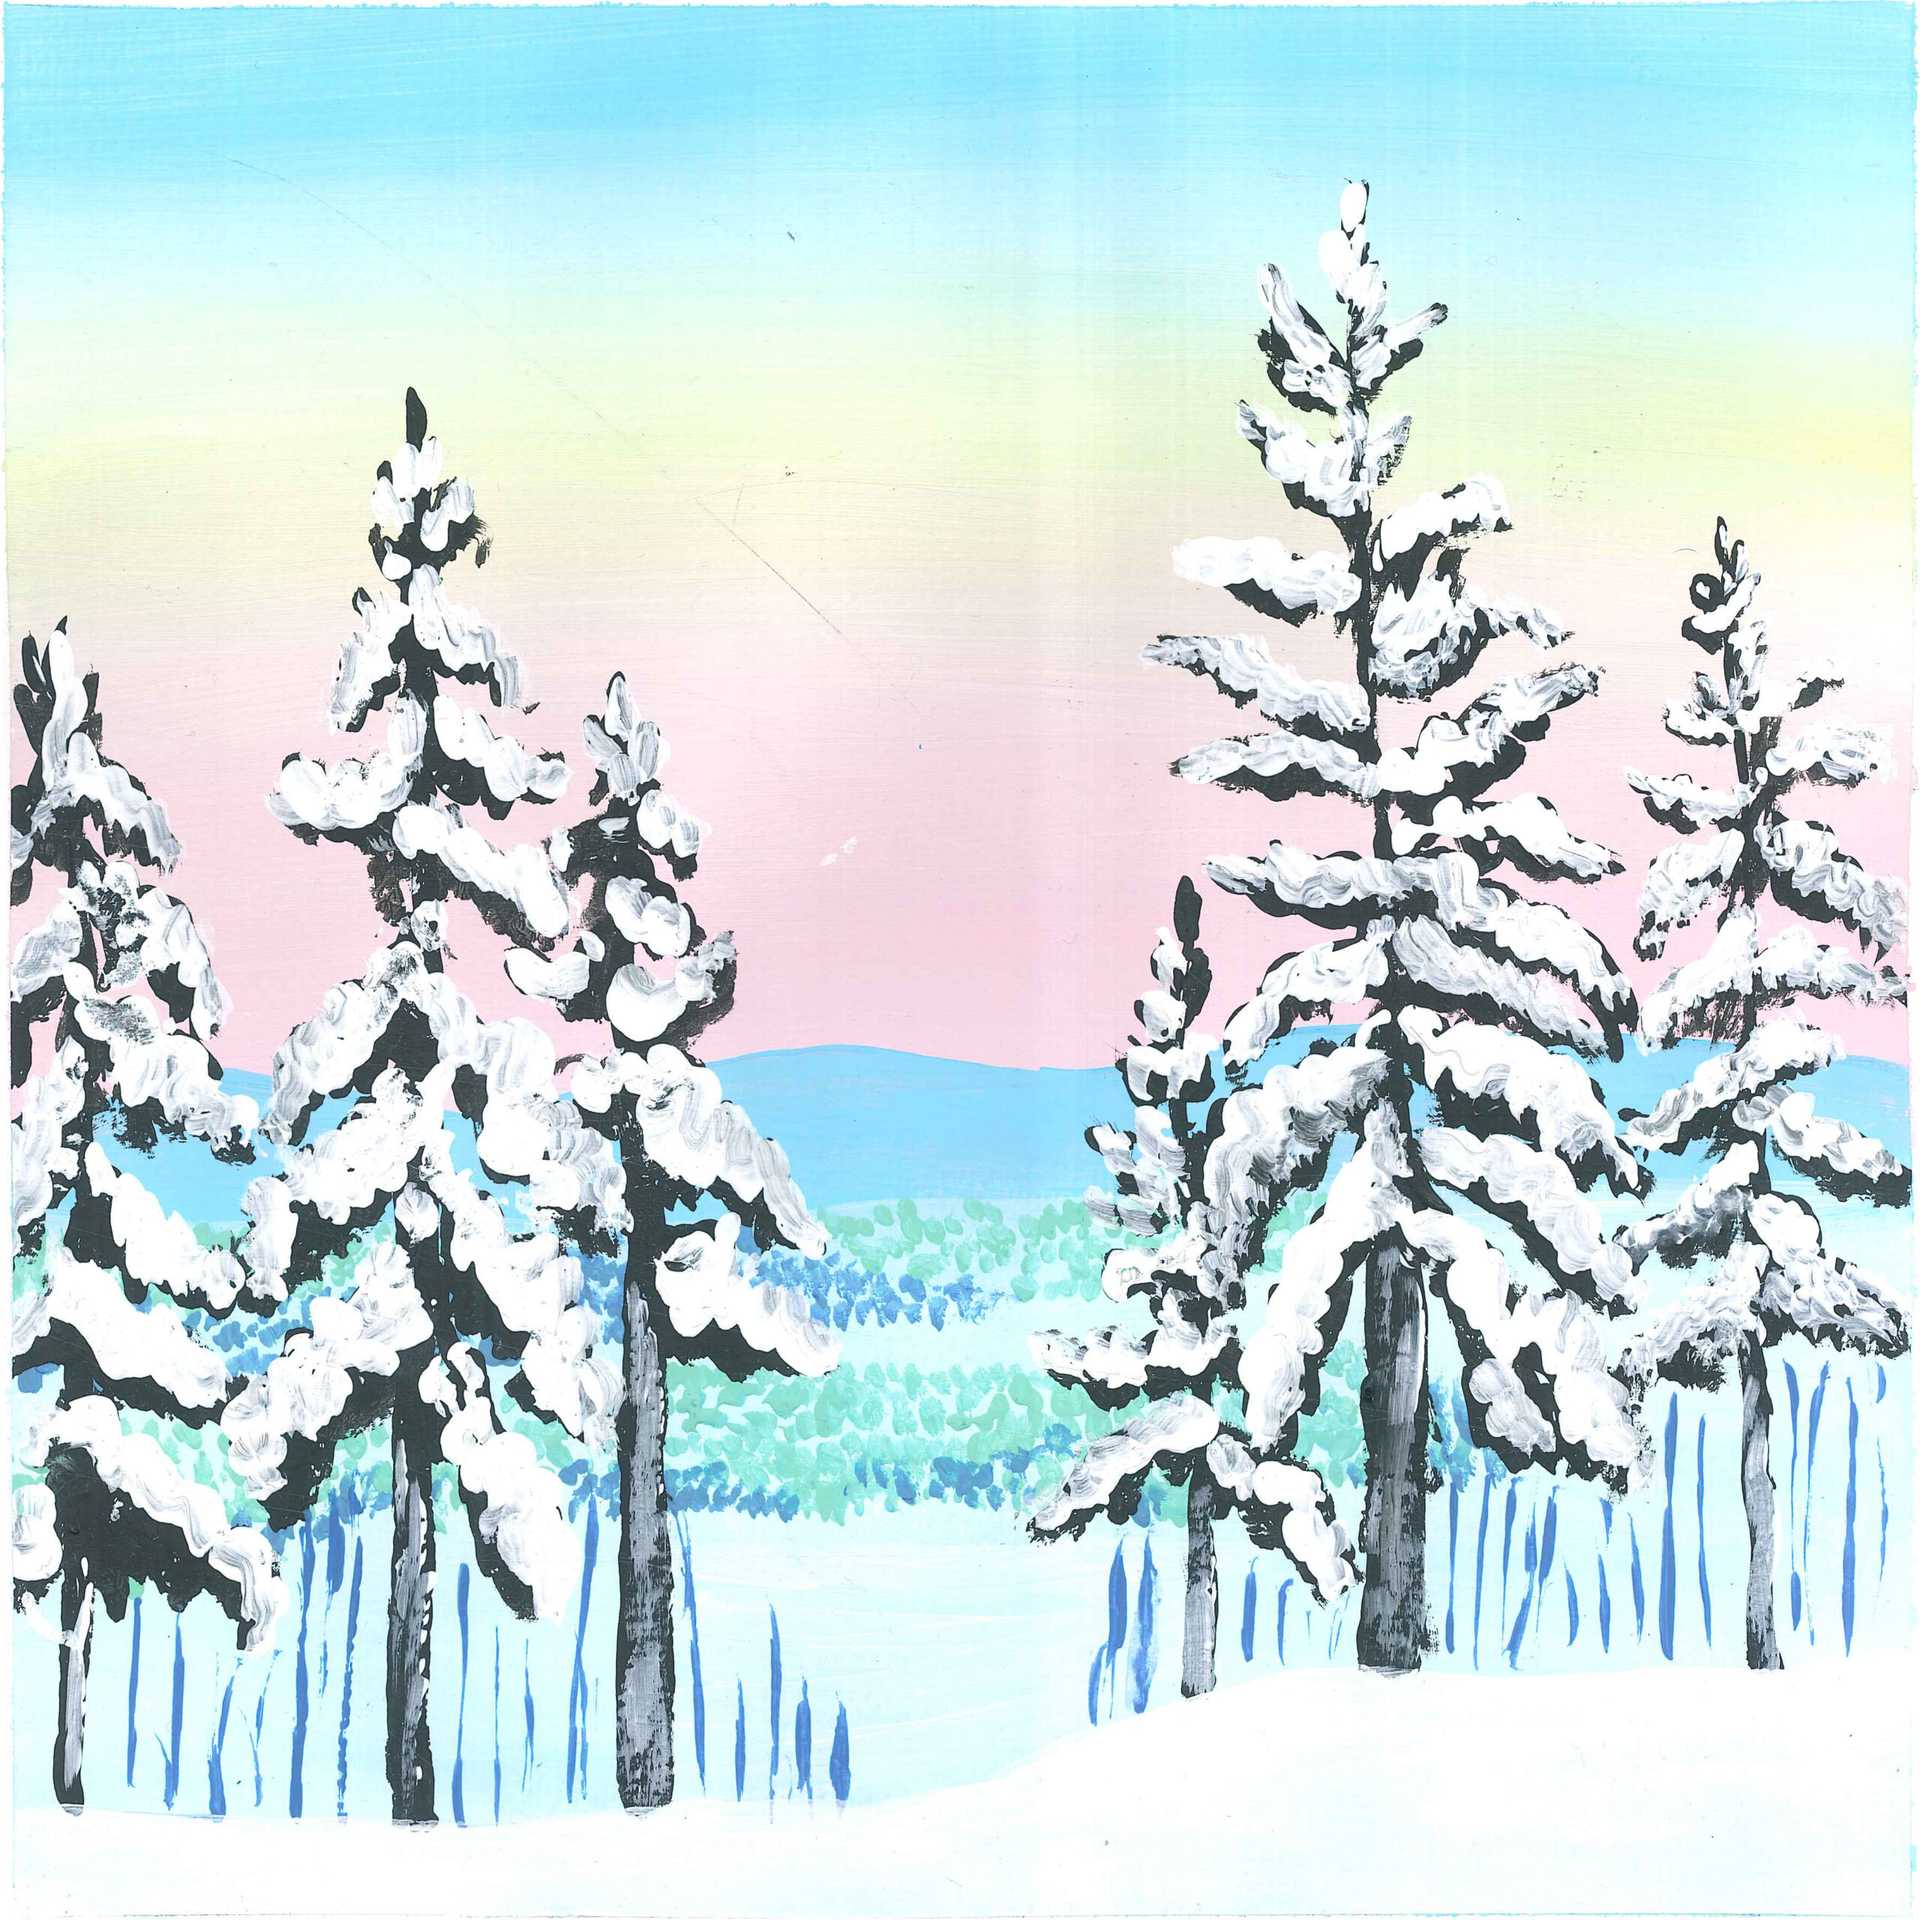 Falling Snow in the Forest - nature landscape painting - earth.fm